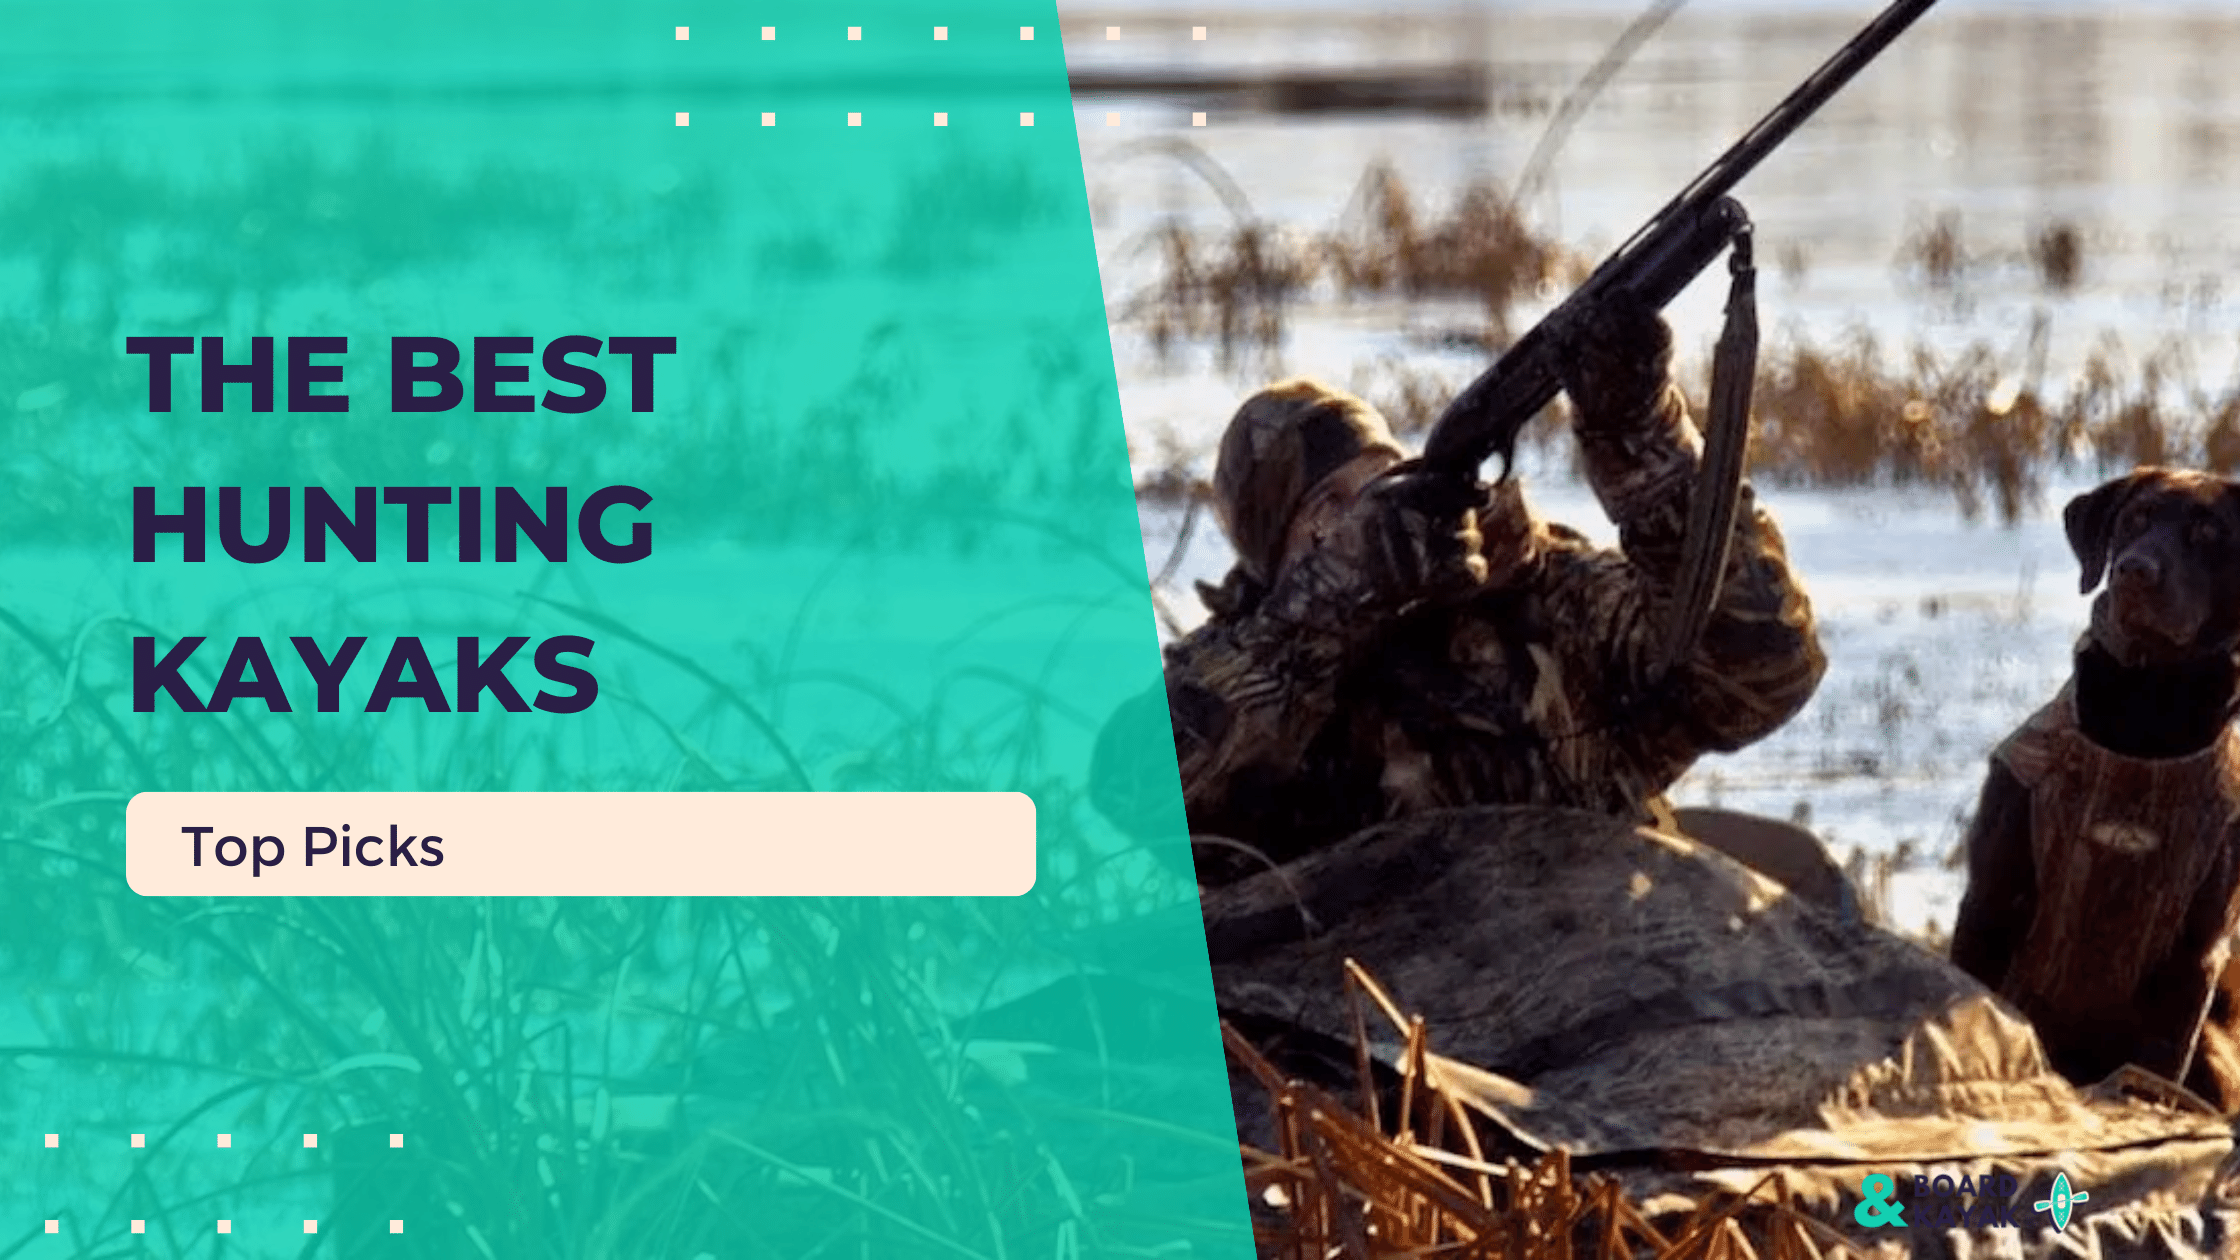 The Best Hunting Kayaks for Waterfowlers